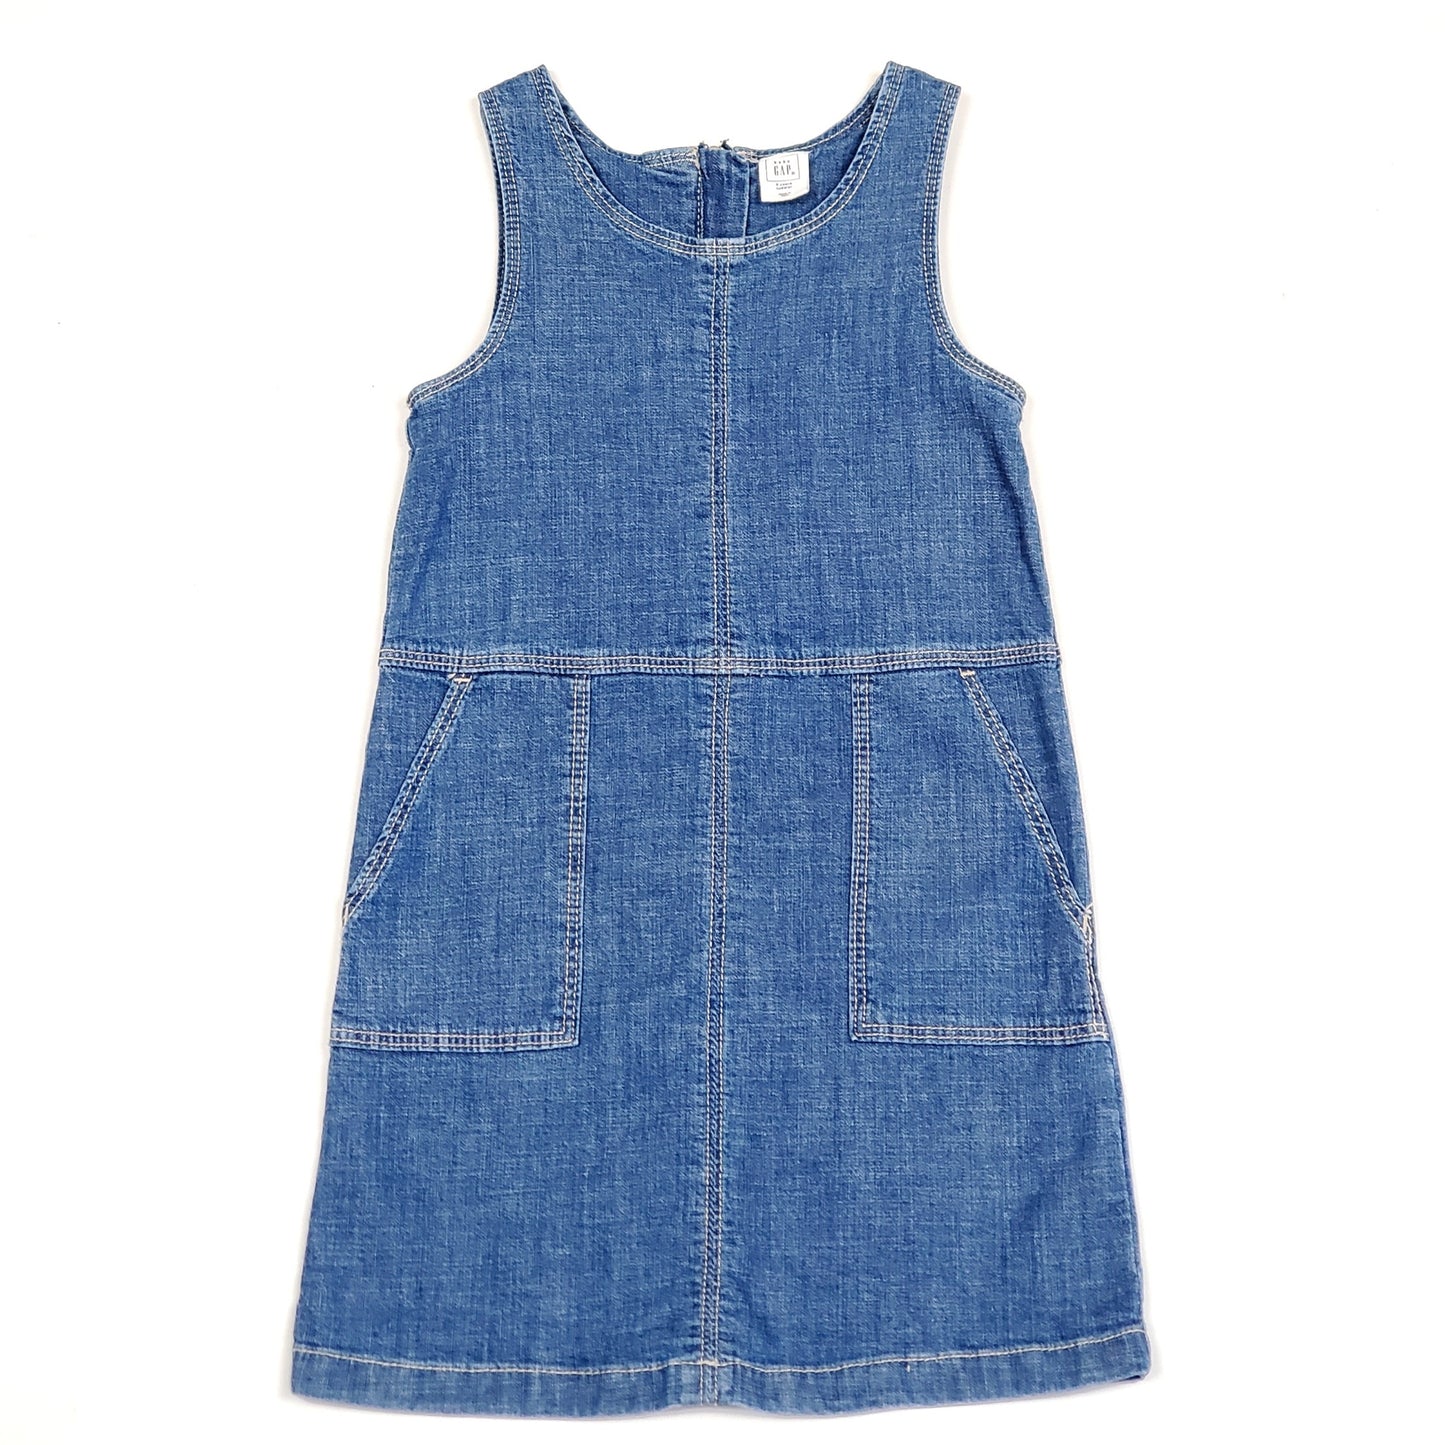 Gap Girls Denim Overall Dress Size 5 Used View 1